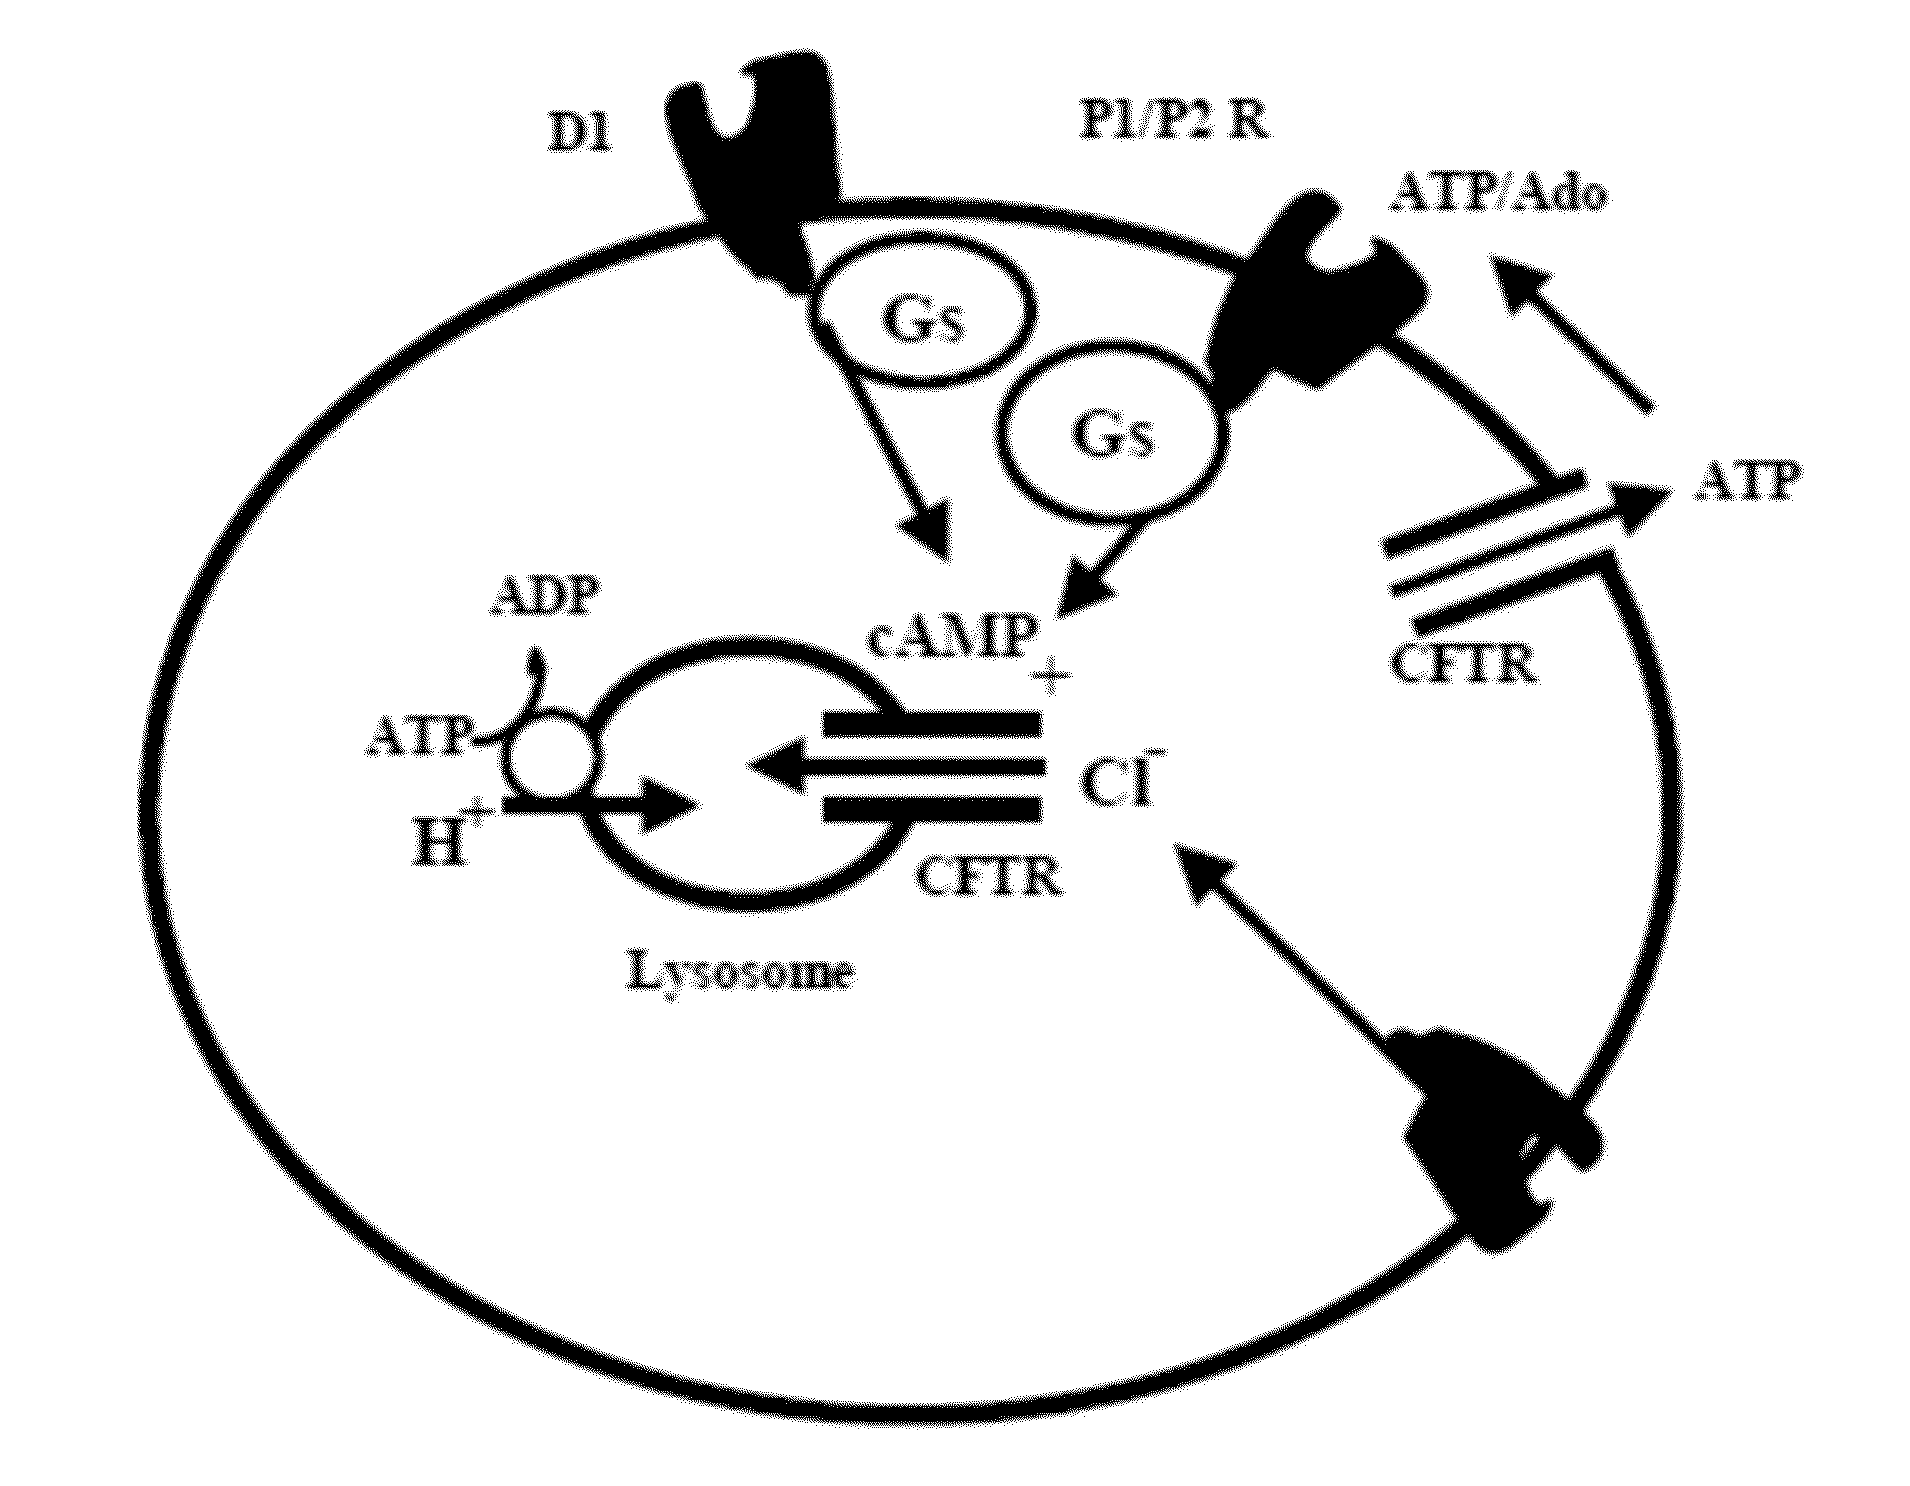 Method For Treatment Of Macular Degeneration By Modulating P2Y12 or P2X7 Receptors